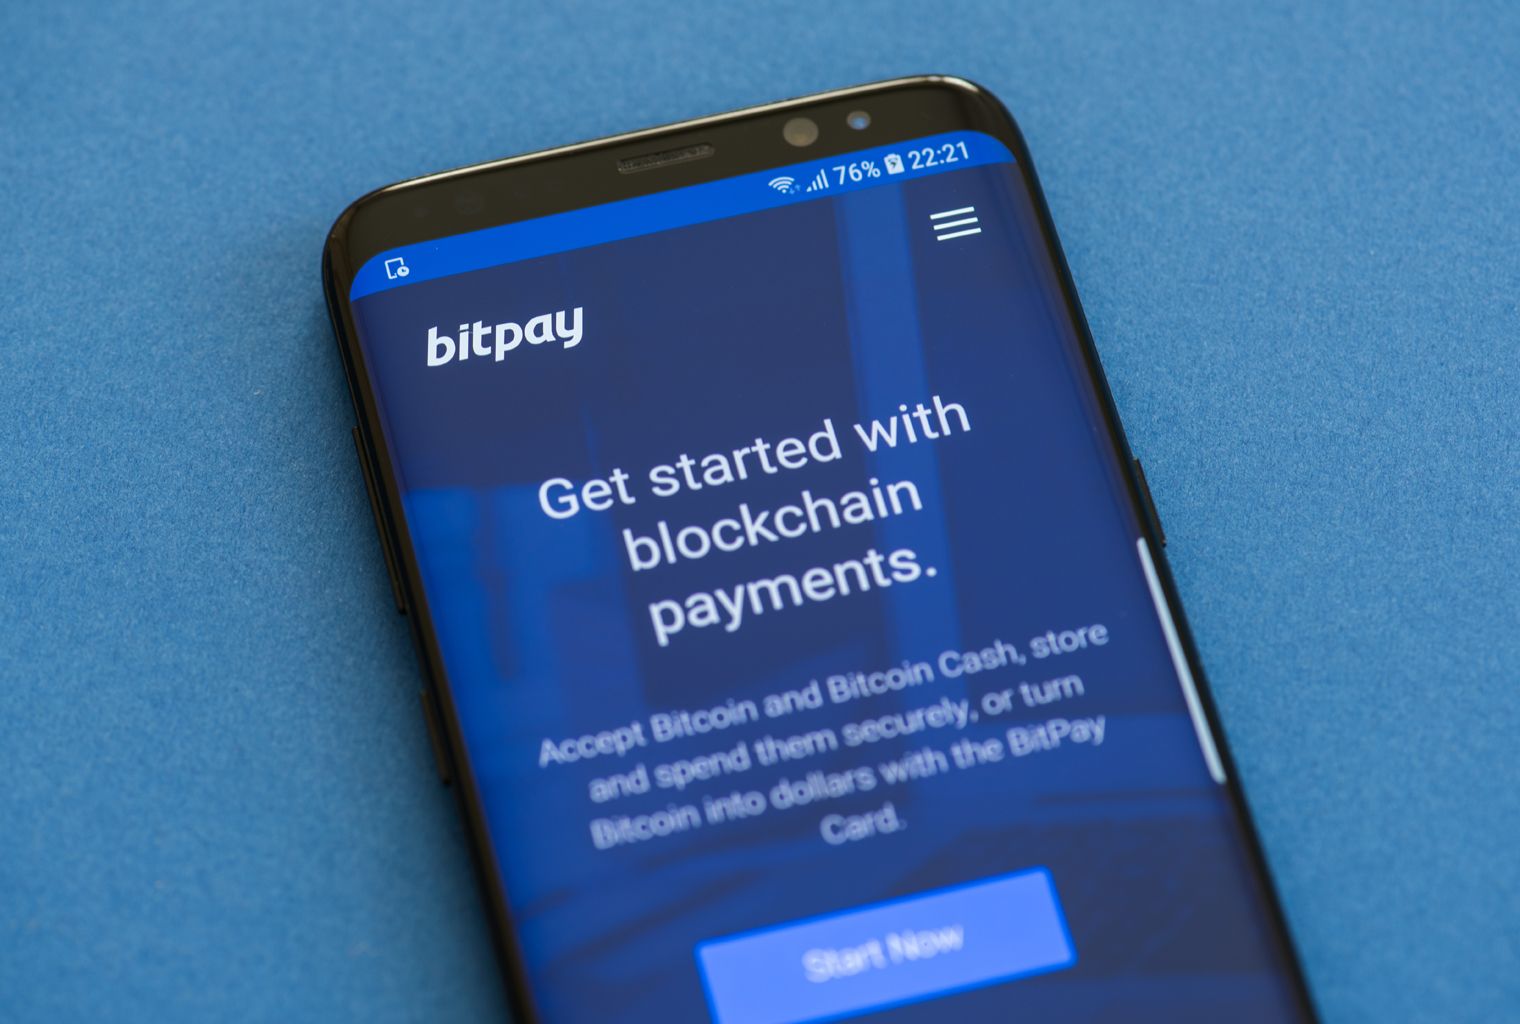 Look No Further, Here are the 5 Best Crypto Trading/Payment Apps You Need to Know About - 1